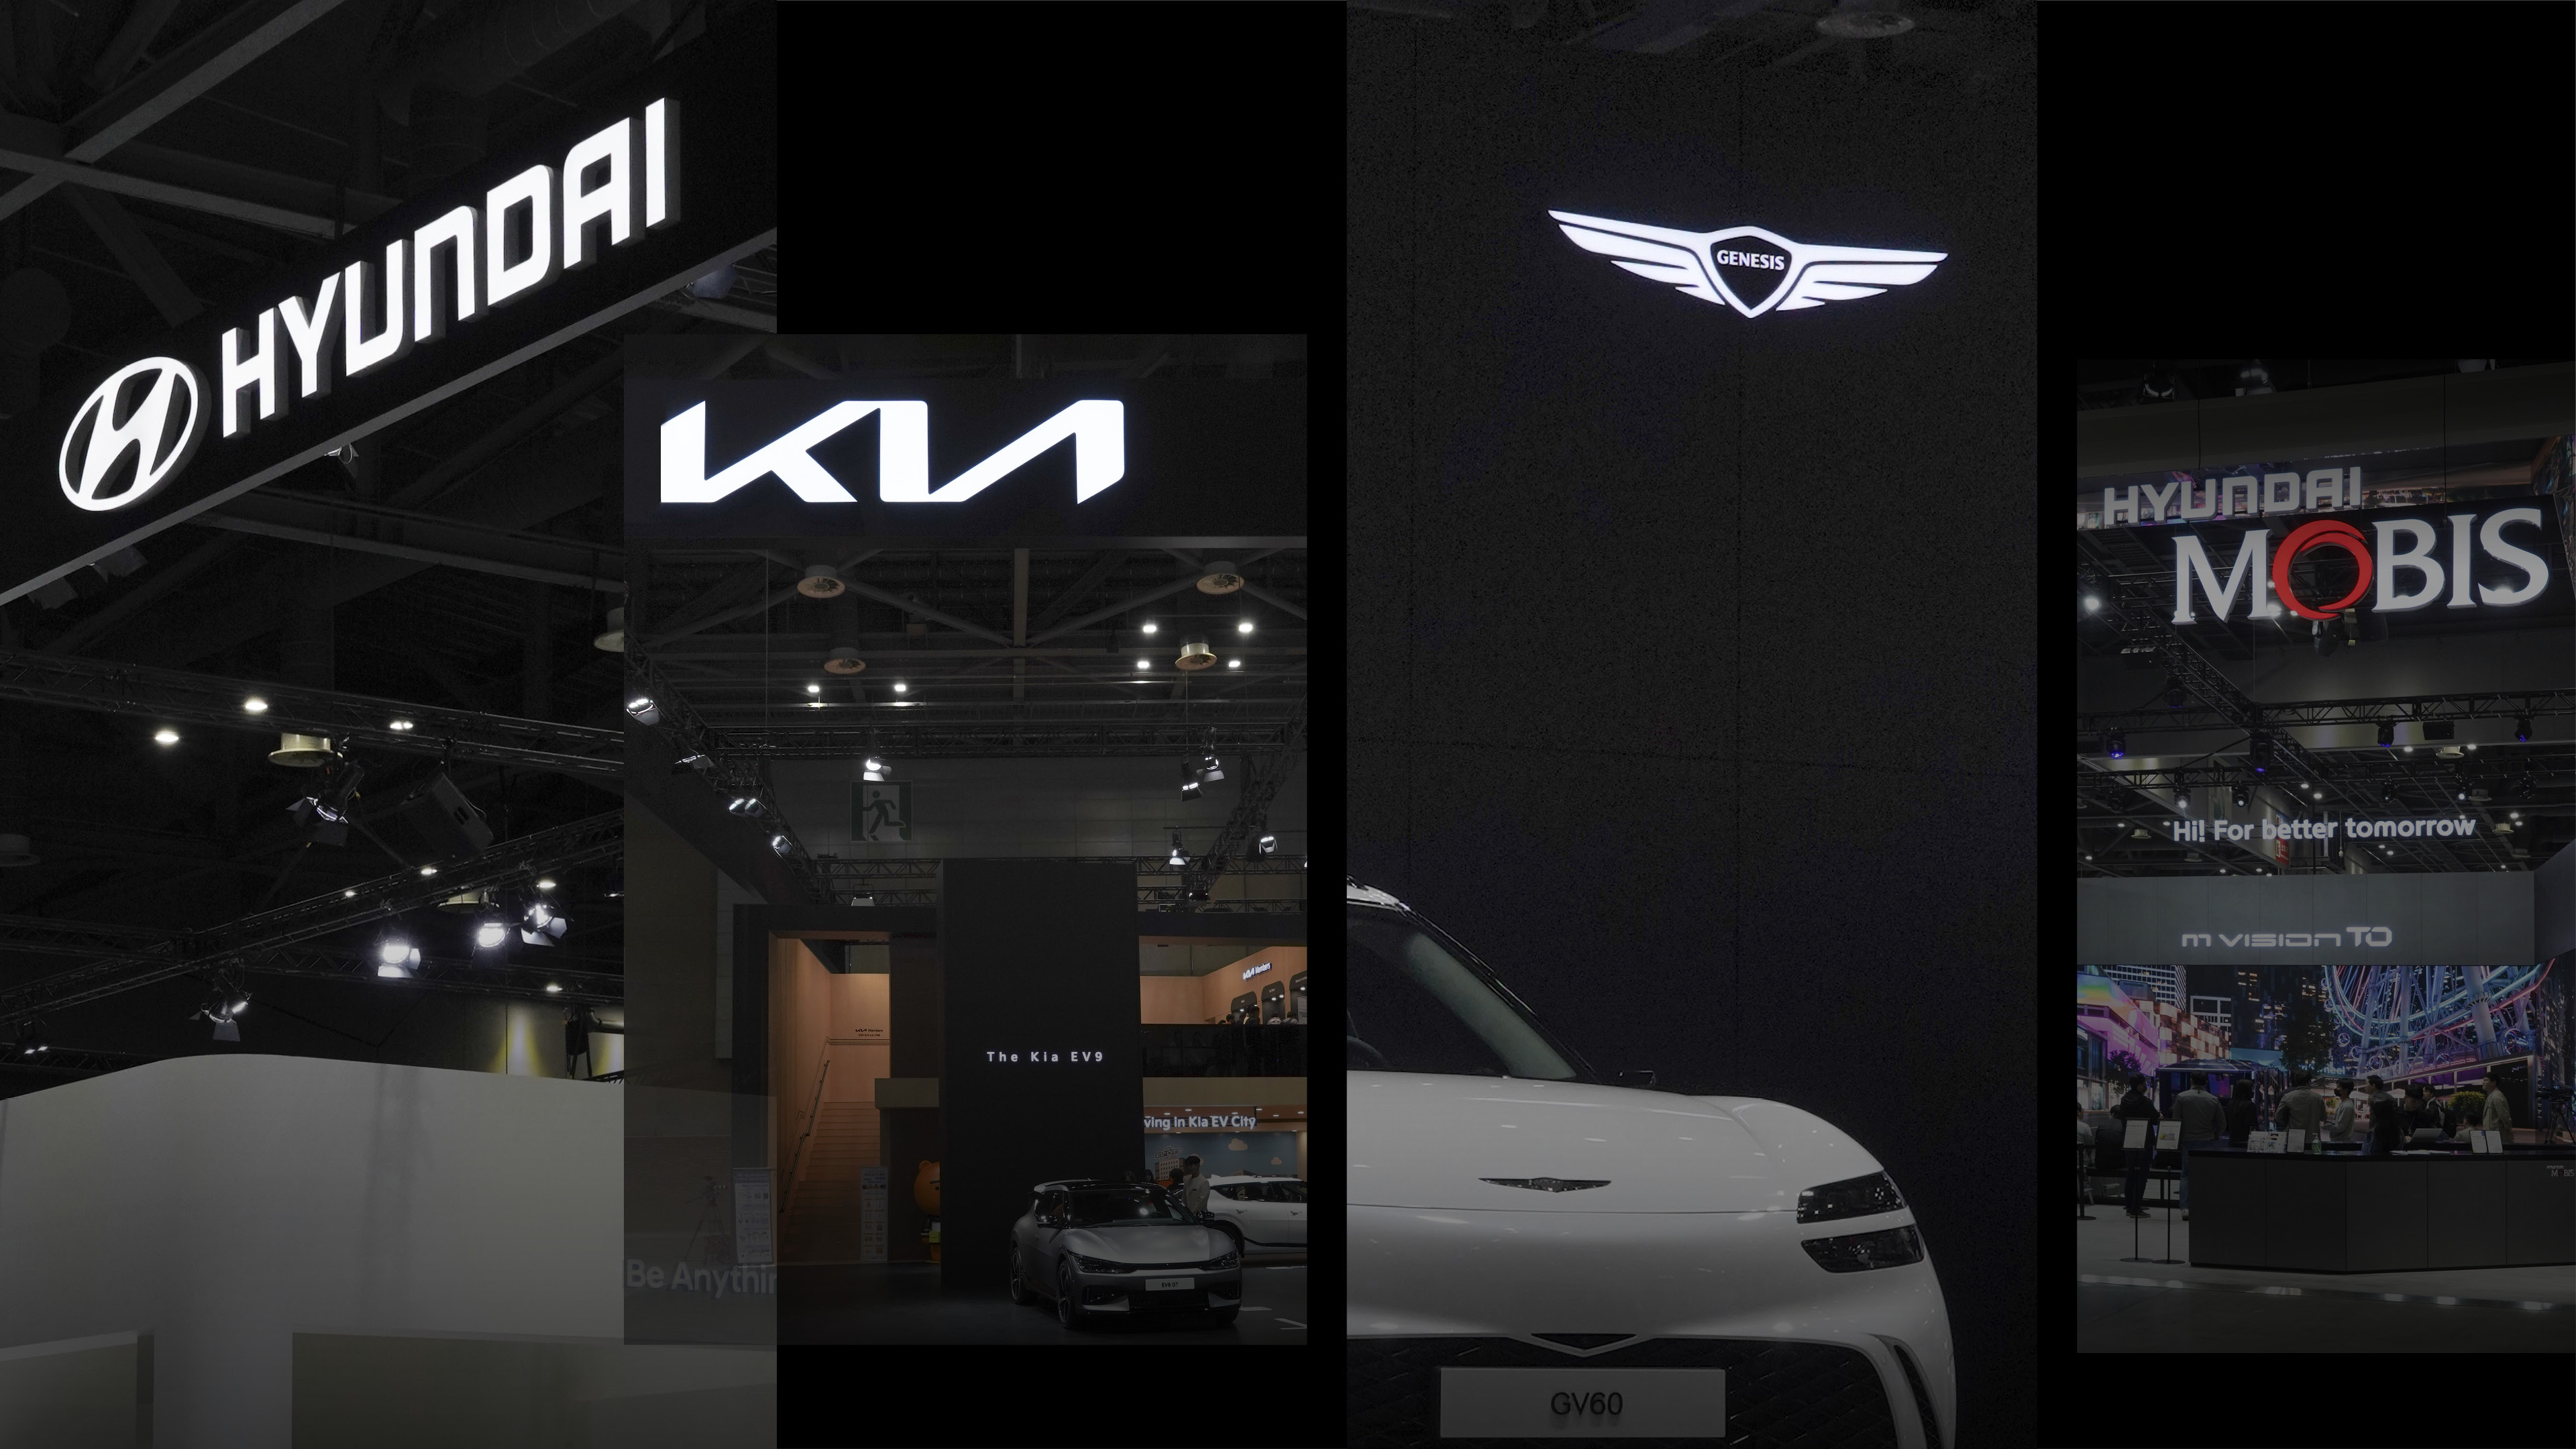 Each brand of Hyundai Motor Group showcased at the Seoul Mobility Show